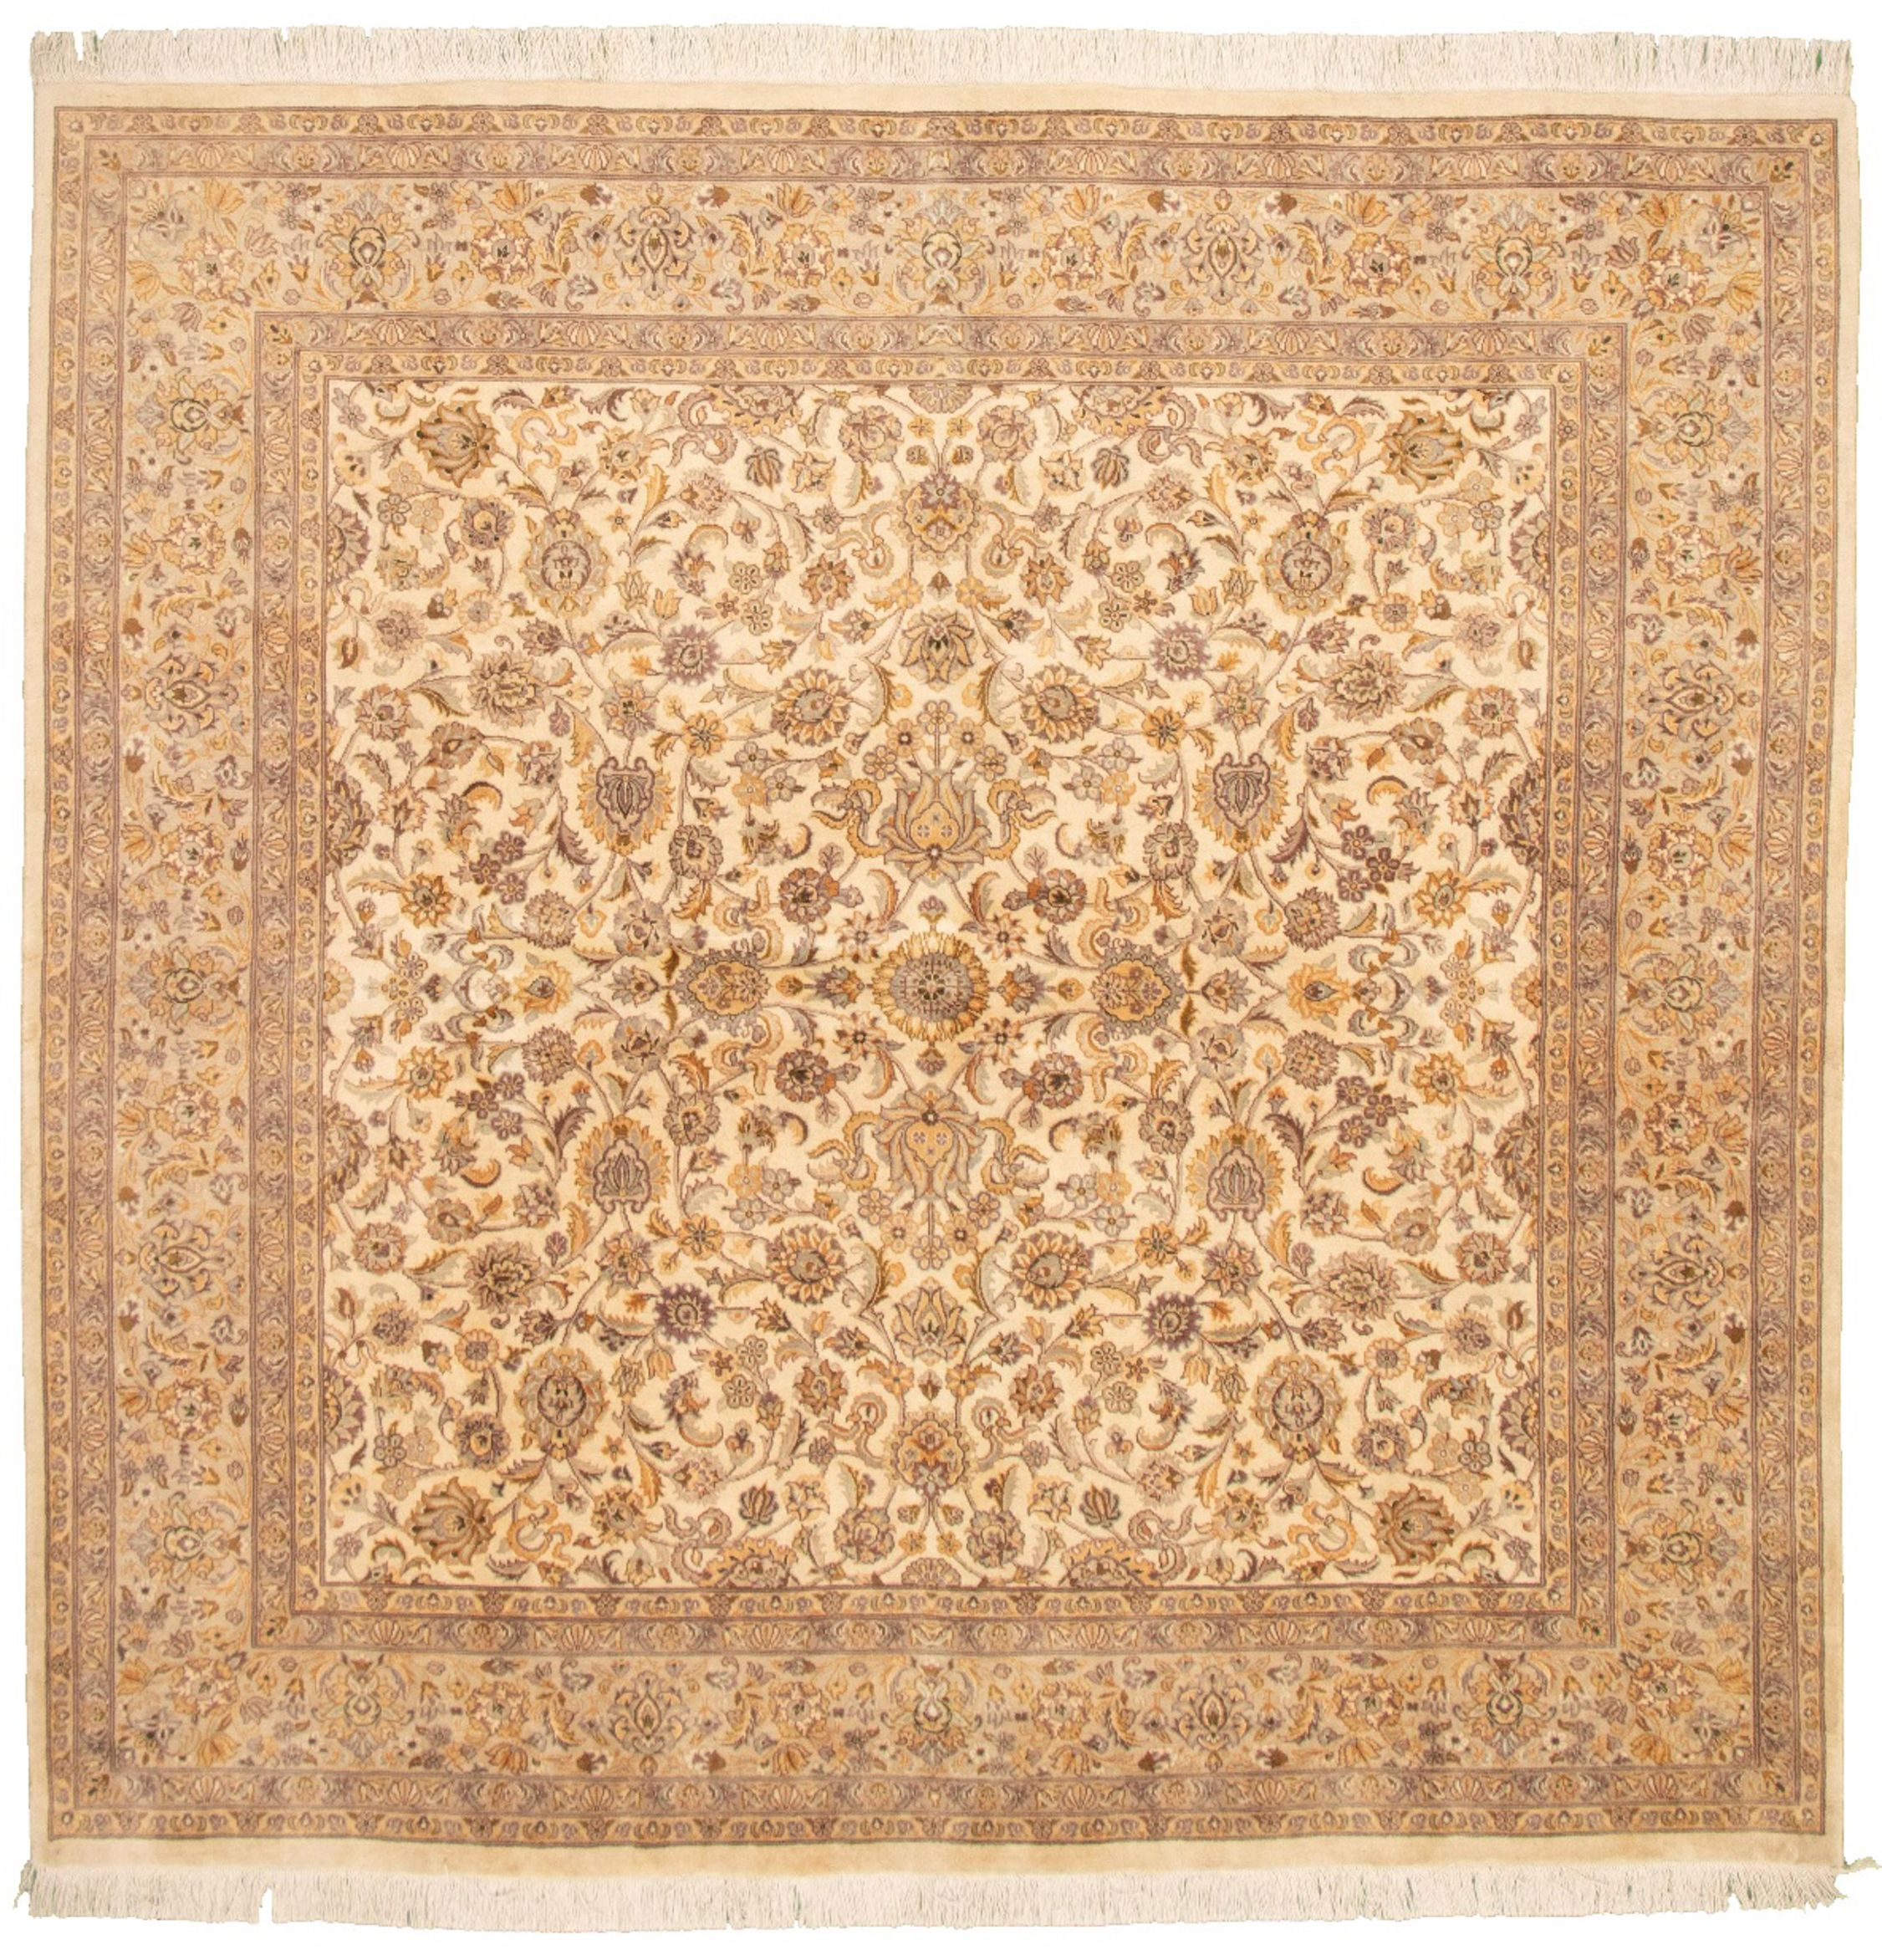 Hand-knotted Pako Persian 18/20 Cream Wool Rug 7'10" x 8'0" Size: 7'10" x 8'0"  